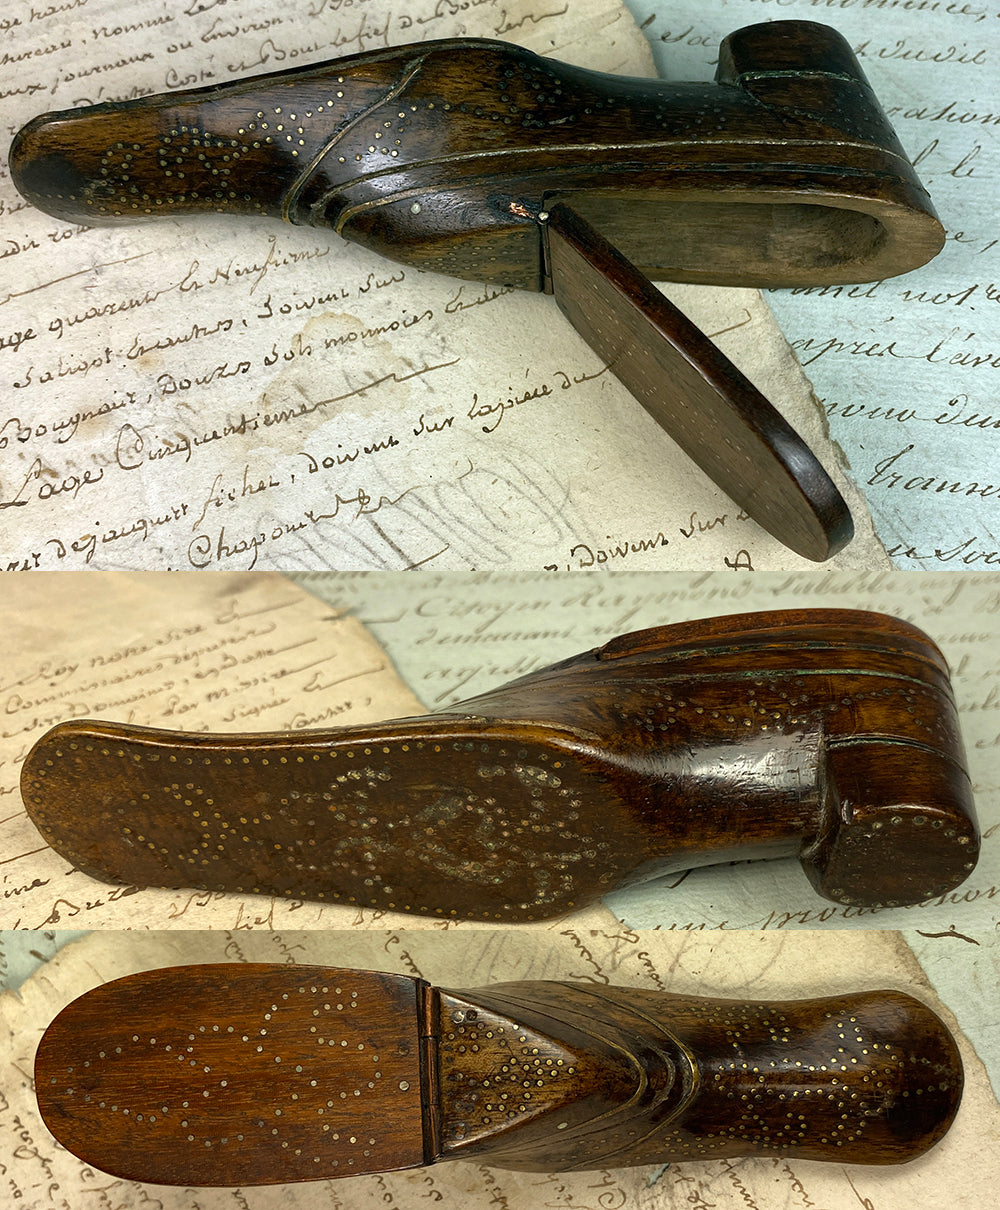 Antique French Hand Carved 5" Long Shoe or Boot Snuff Box #3, Pique, 18th Century to Early 1800s